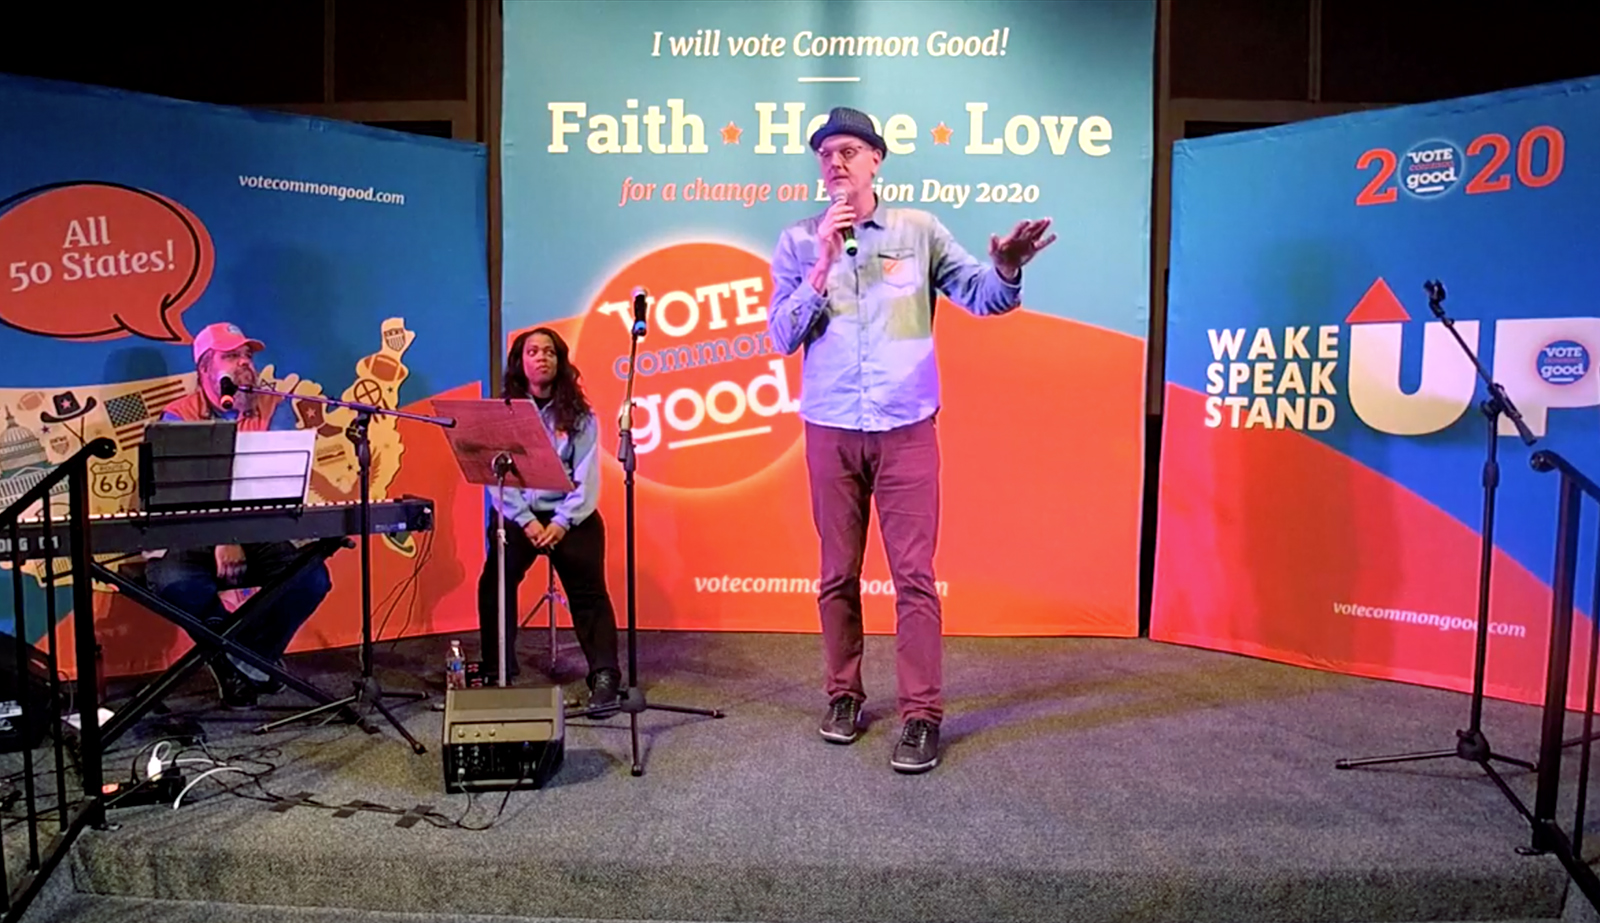 Doug Pagitt, center, speaks during a Vote Common Good rally at a United Church of Christ in Fresno, California, on Jan. 19, 2020. Video screen grab